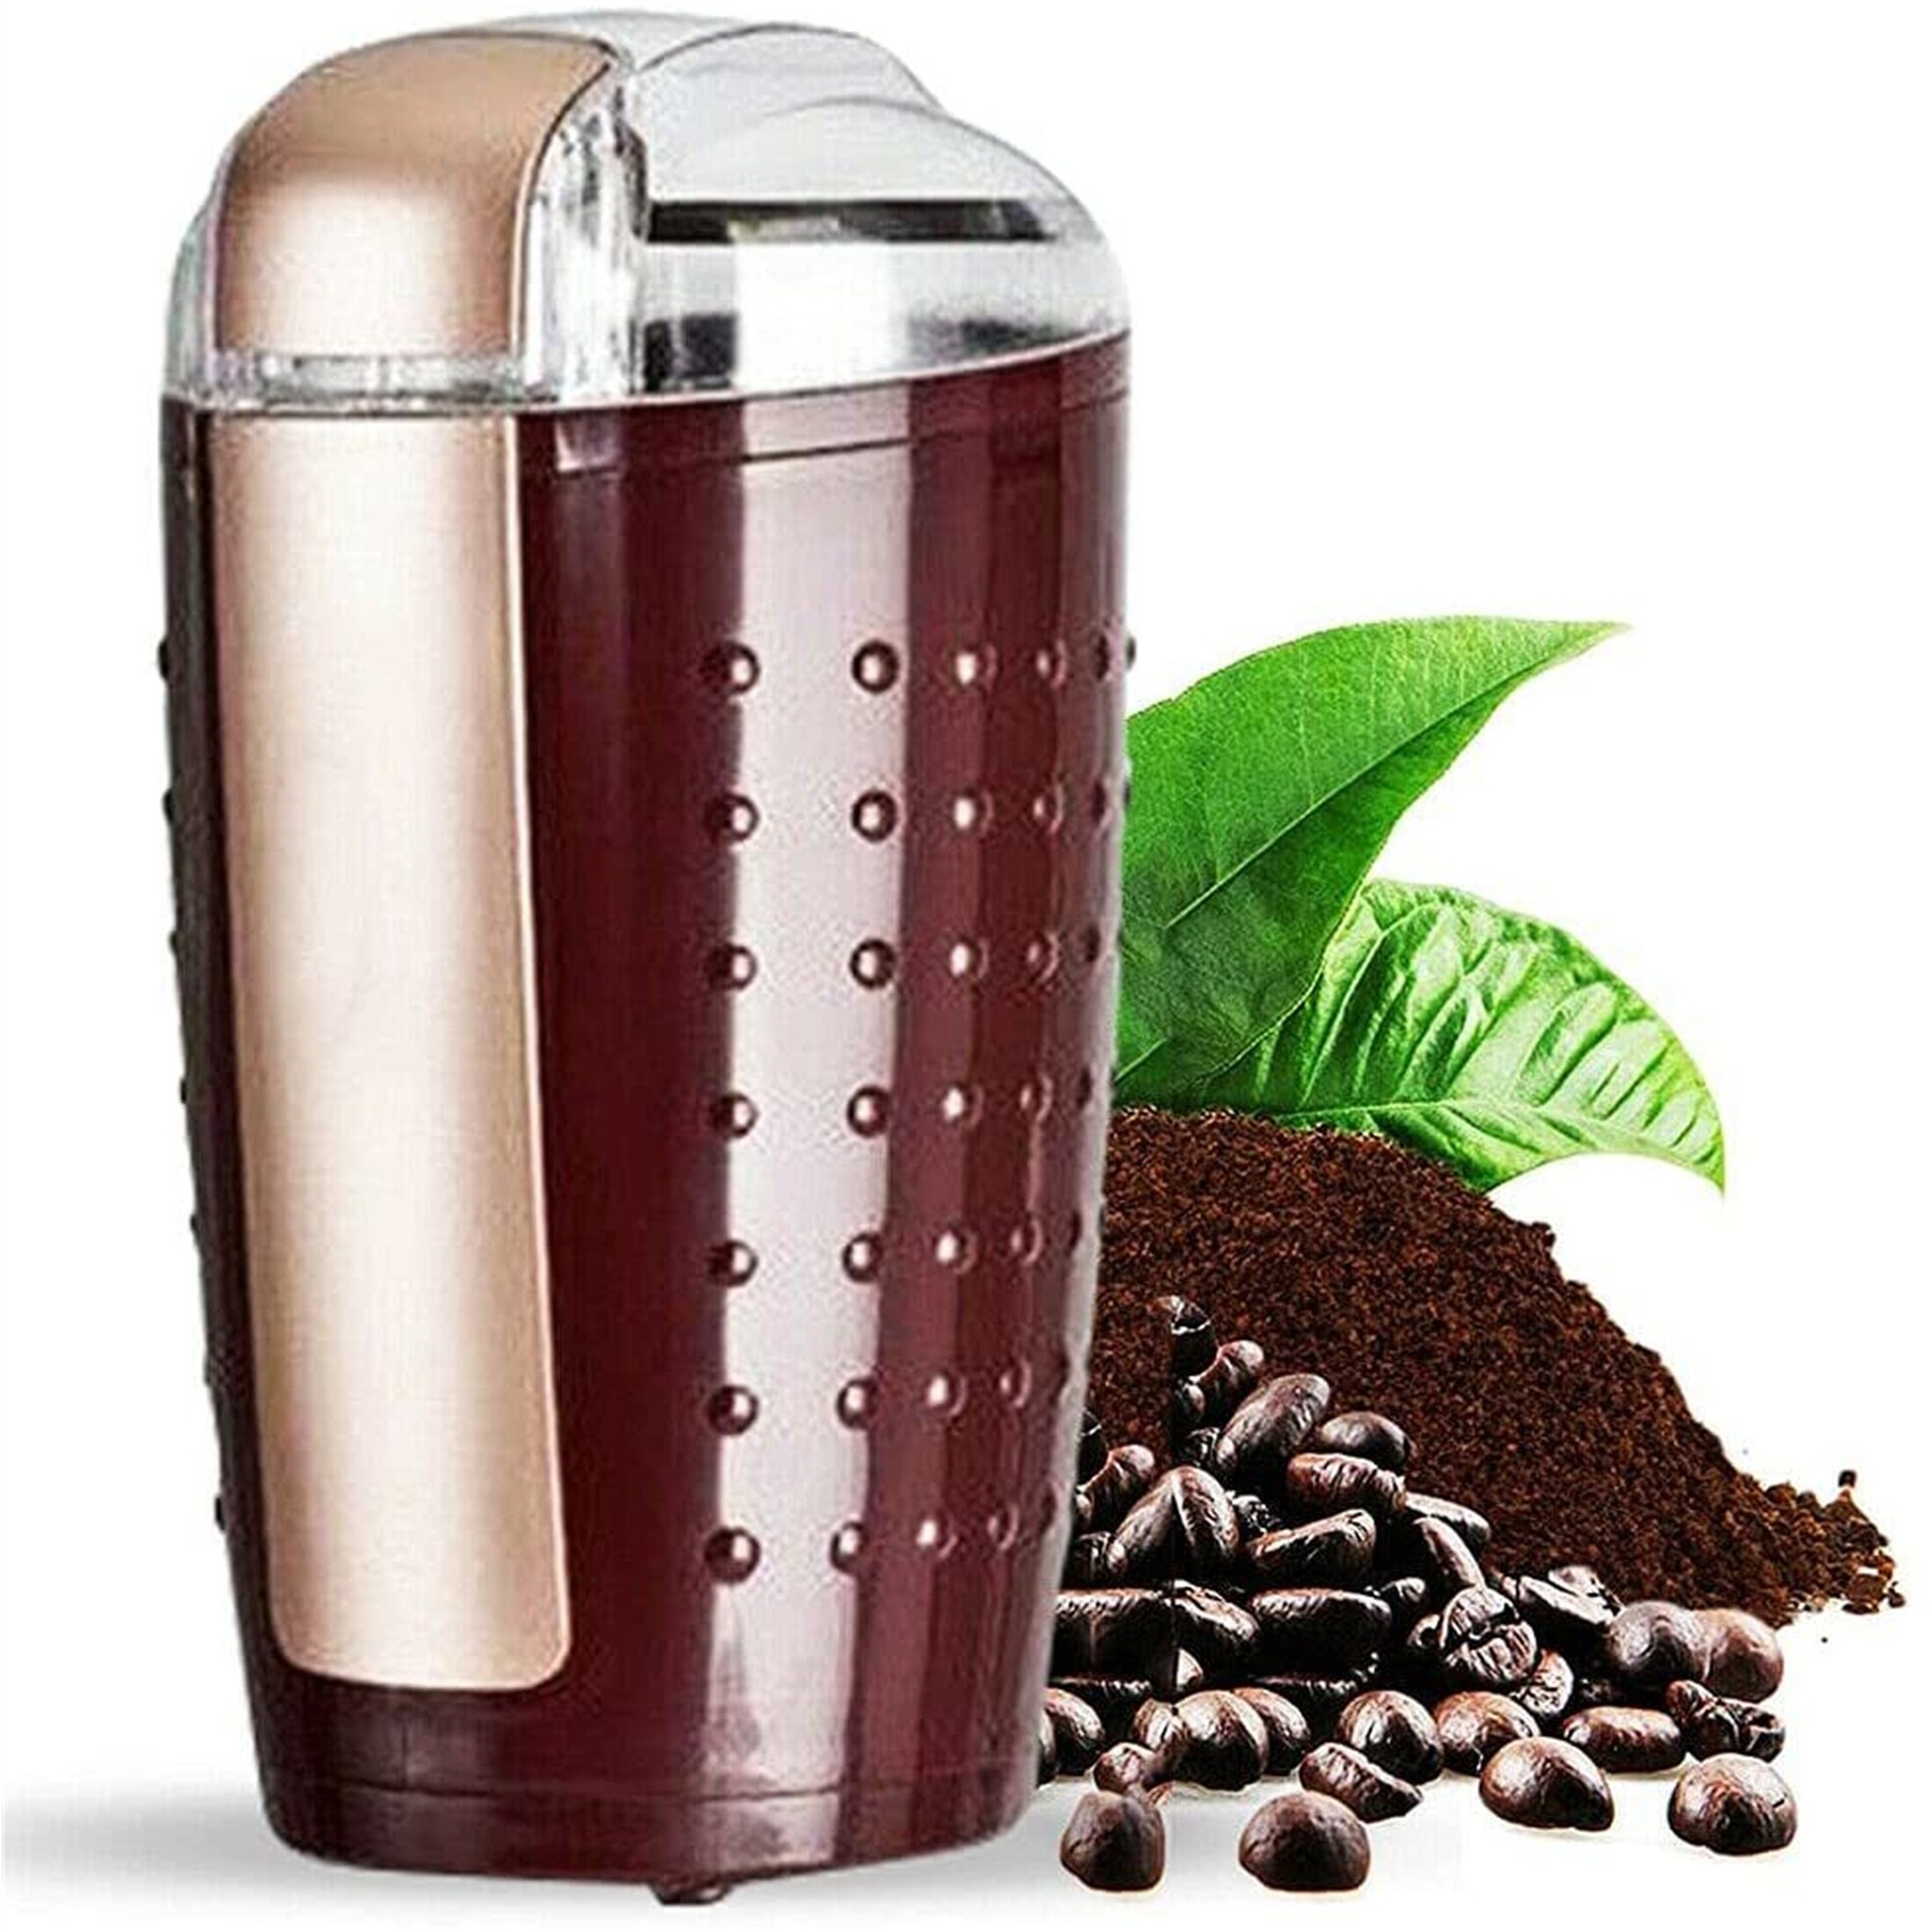 https://ak1.ostkcdn.com/images/products/is/images/direct/6b98dd916ccc05aebf2c0b750ac9eabd53e3ced6/Coffee-Grinder-Spice-Nut-Grinders-Blender-Kitchen-Living-Room-Brown.jpg